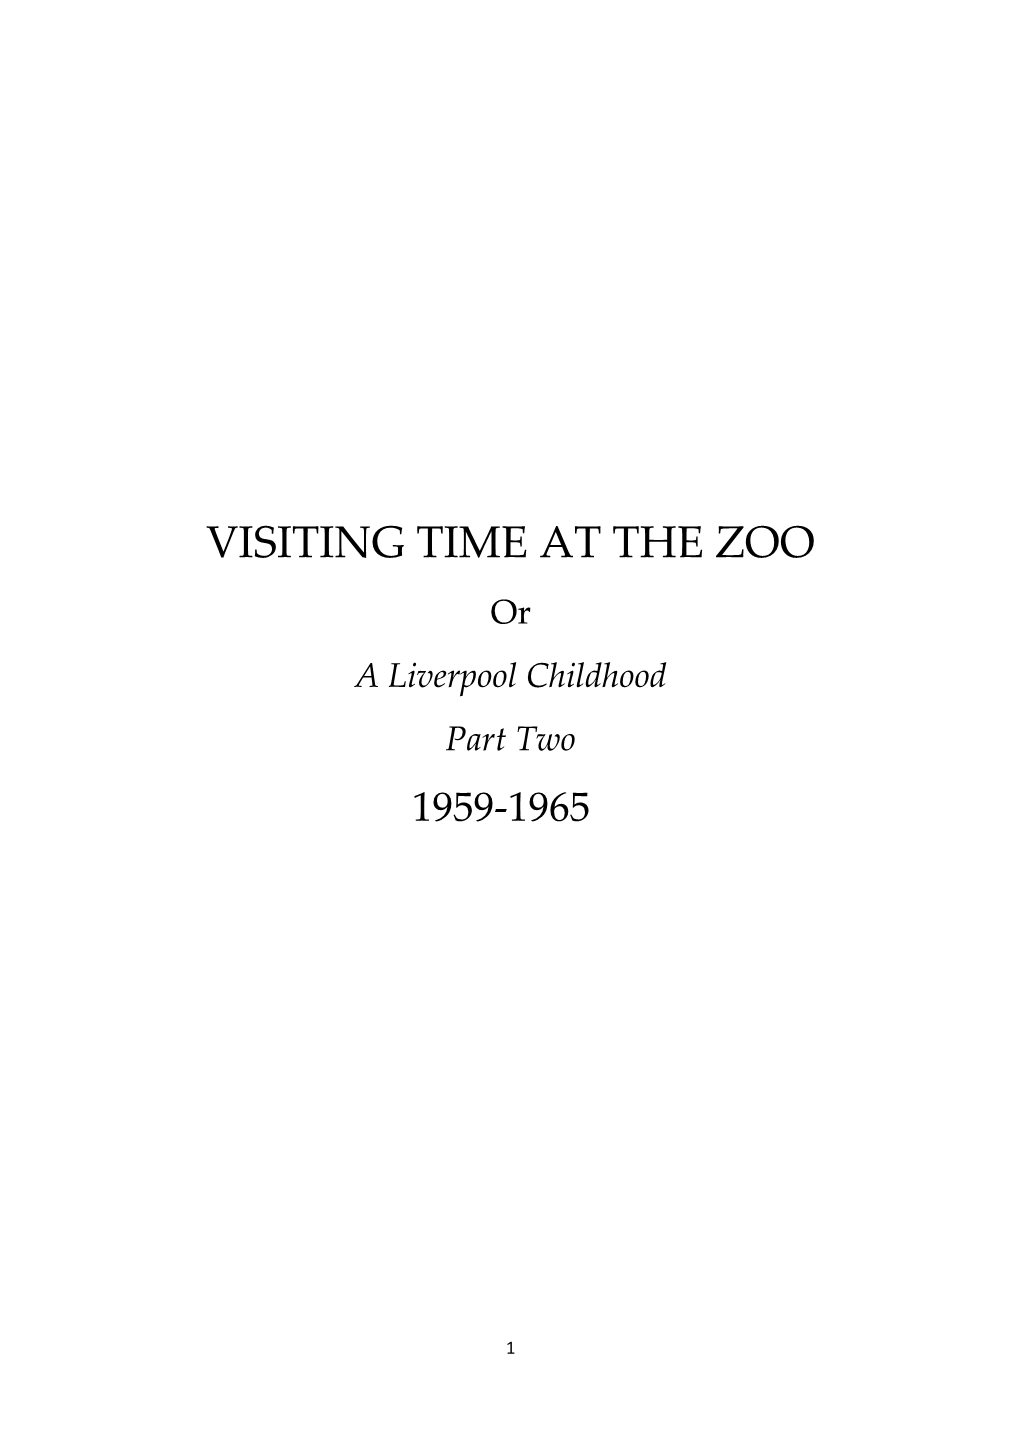 VISITING TIME at the ZOO Or a Liverpool Childhood Part Two 1959-1965